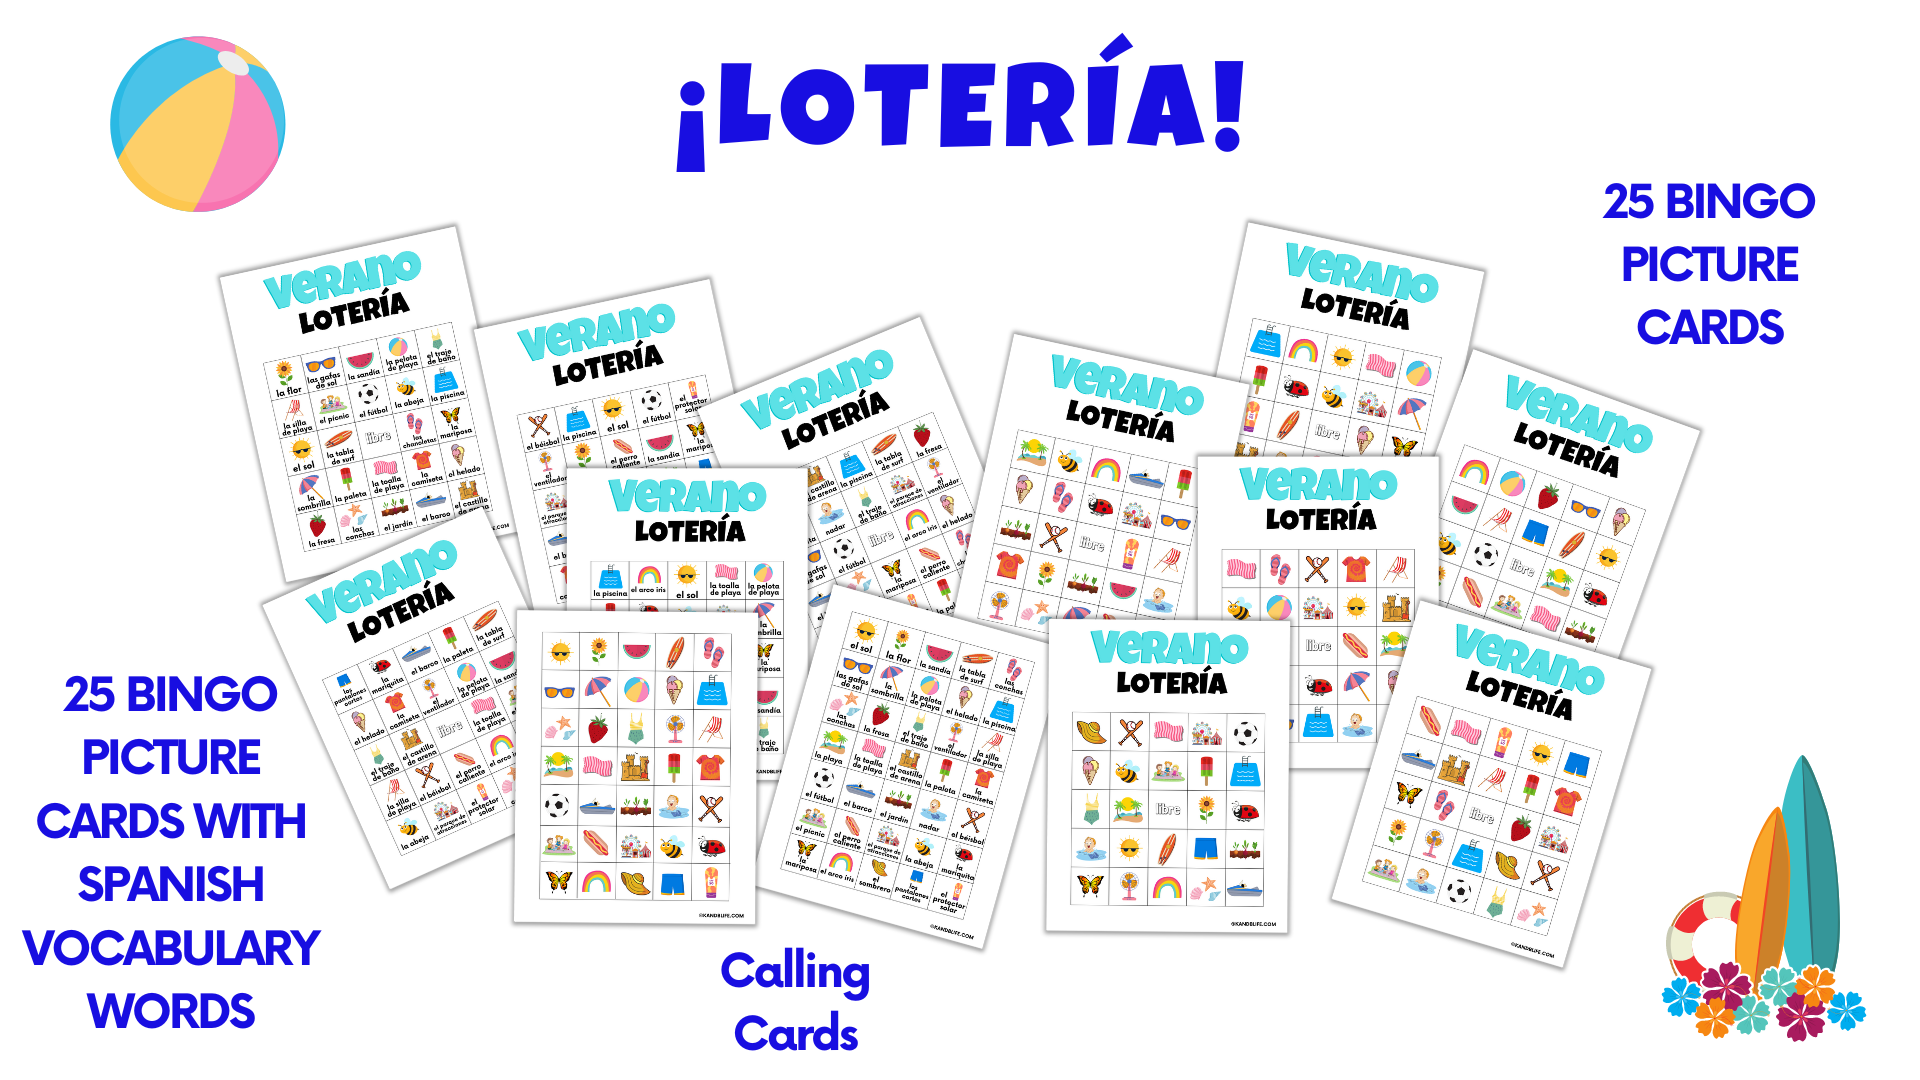 13 Sample pages from the product, Summer Themed Bingo Game, Lotería.